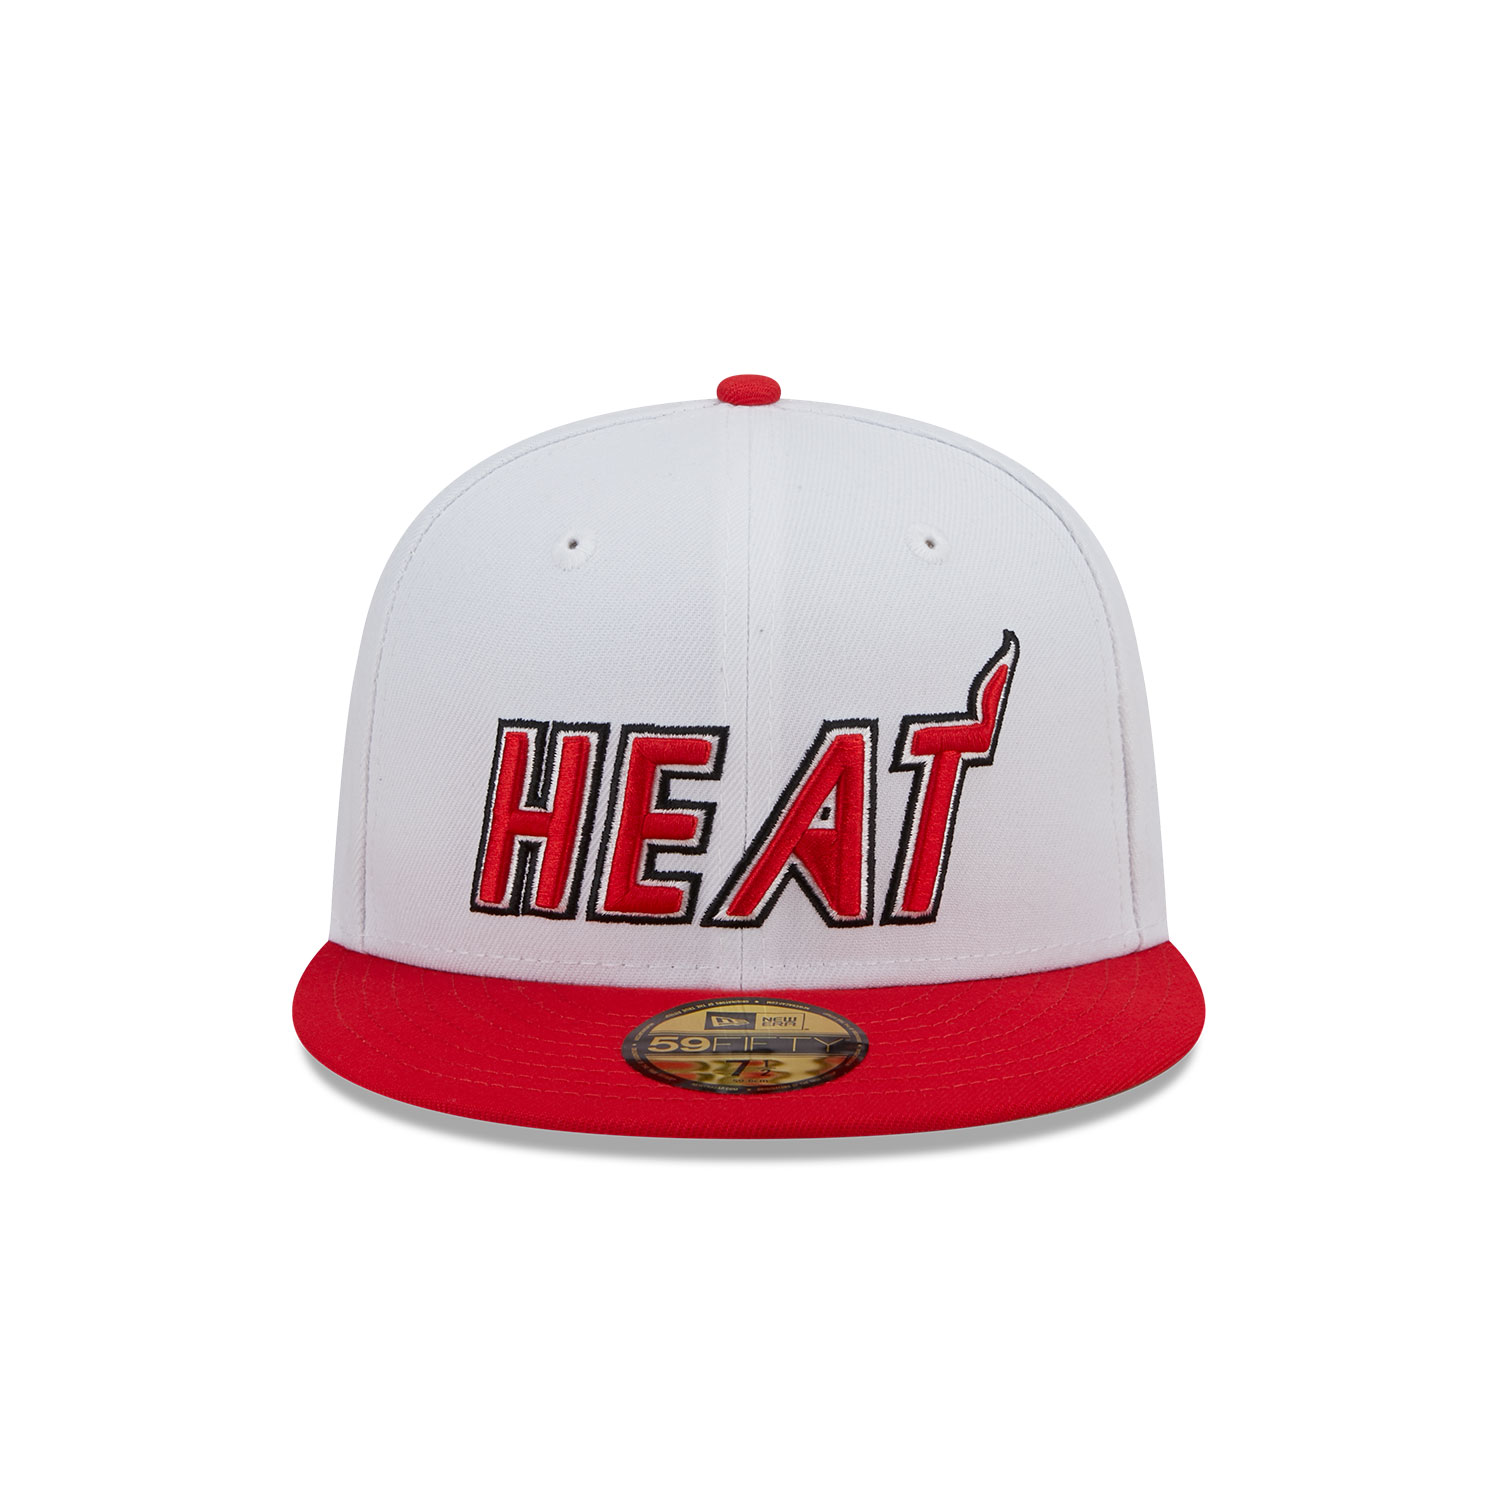 Official New Era NBA Classic Miami Heat White 59FIFTY Fitted Cap B9741 ...